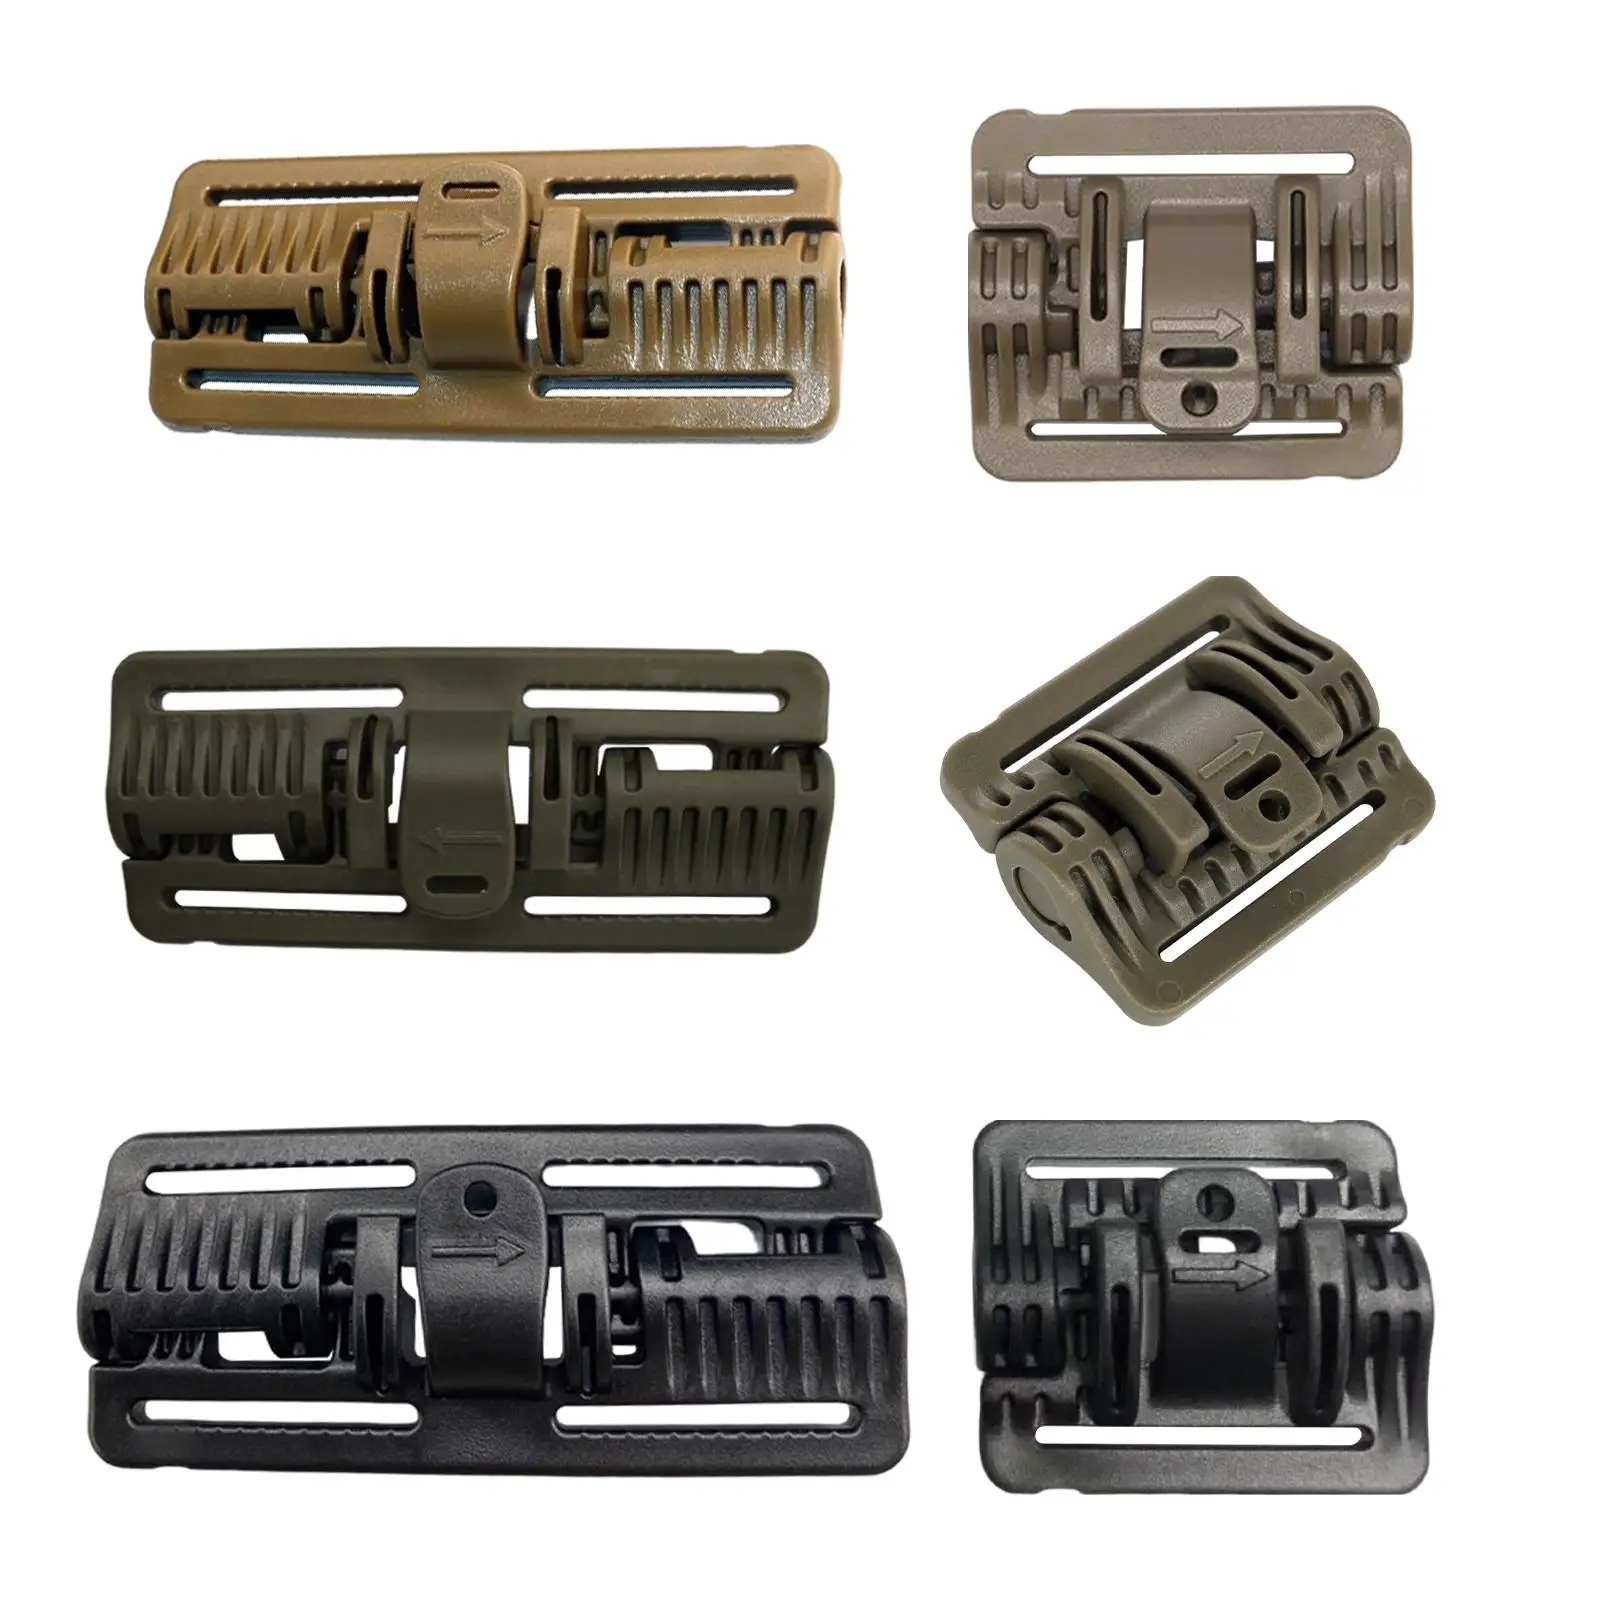 Vest Quick Release Buckle, 1.5 inch Quick Release Assembly Kit Removal Buckle for Hunting, Durable